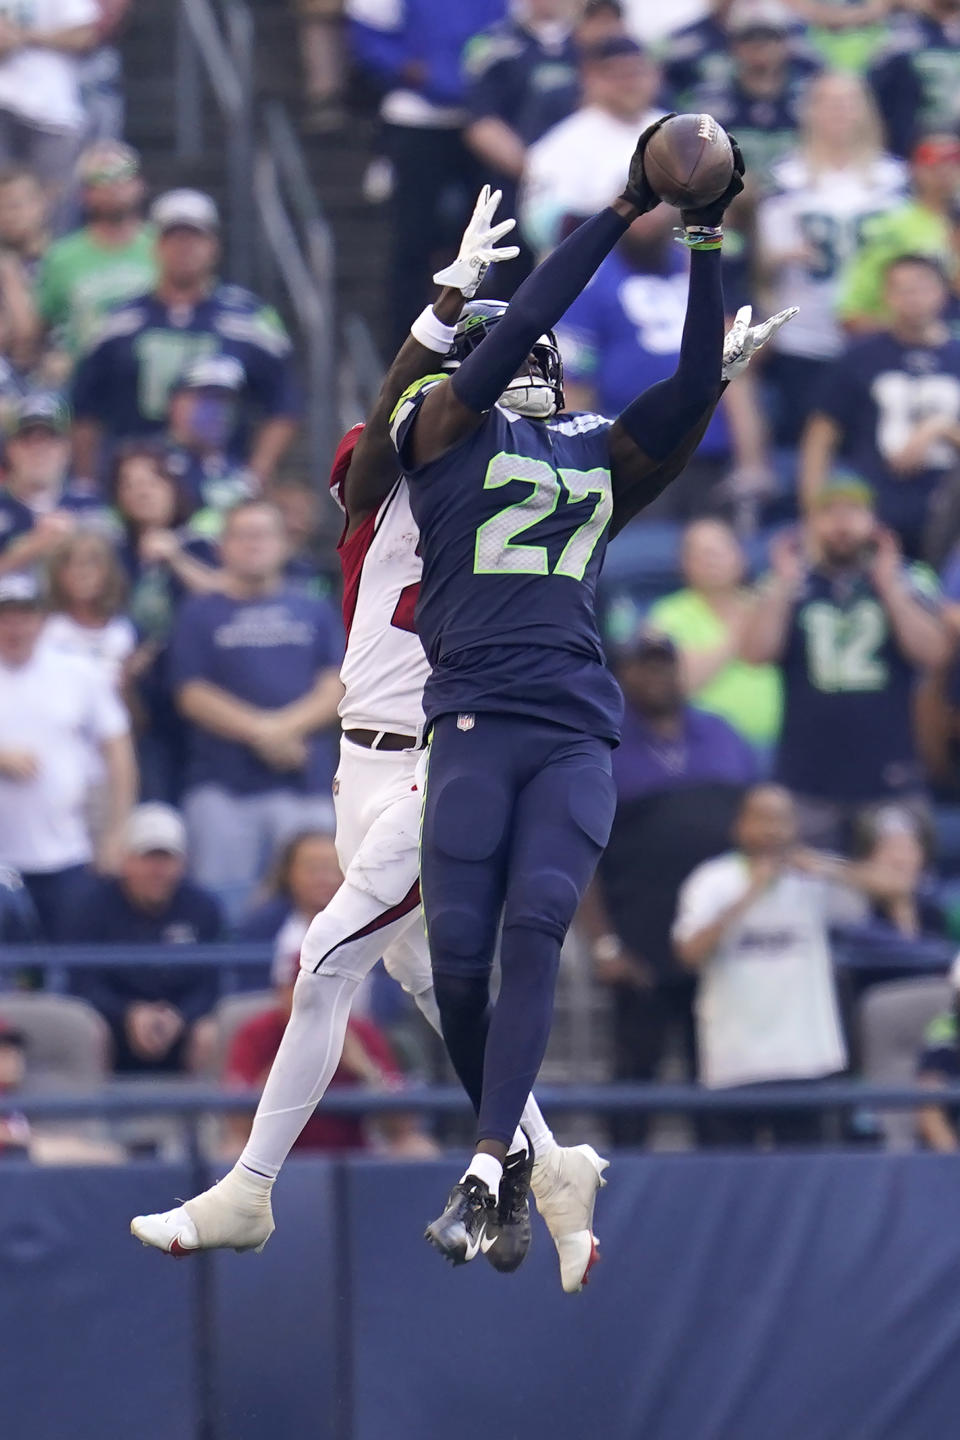 Seattle Seahawks cornerback Tariq Woolen (27) intercepts a pass intended for Arizona Cardinals wide receiver Marquise Brown, rear, during the second half of an NFL football game in Seattle, Sunday, Oct. 16, 2022. (AP Photo/Abbie Parr)